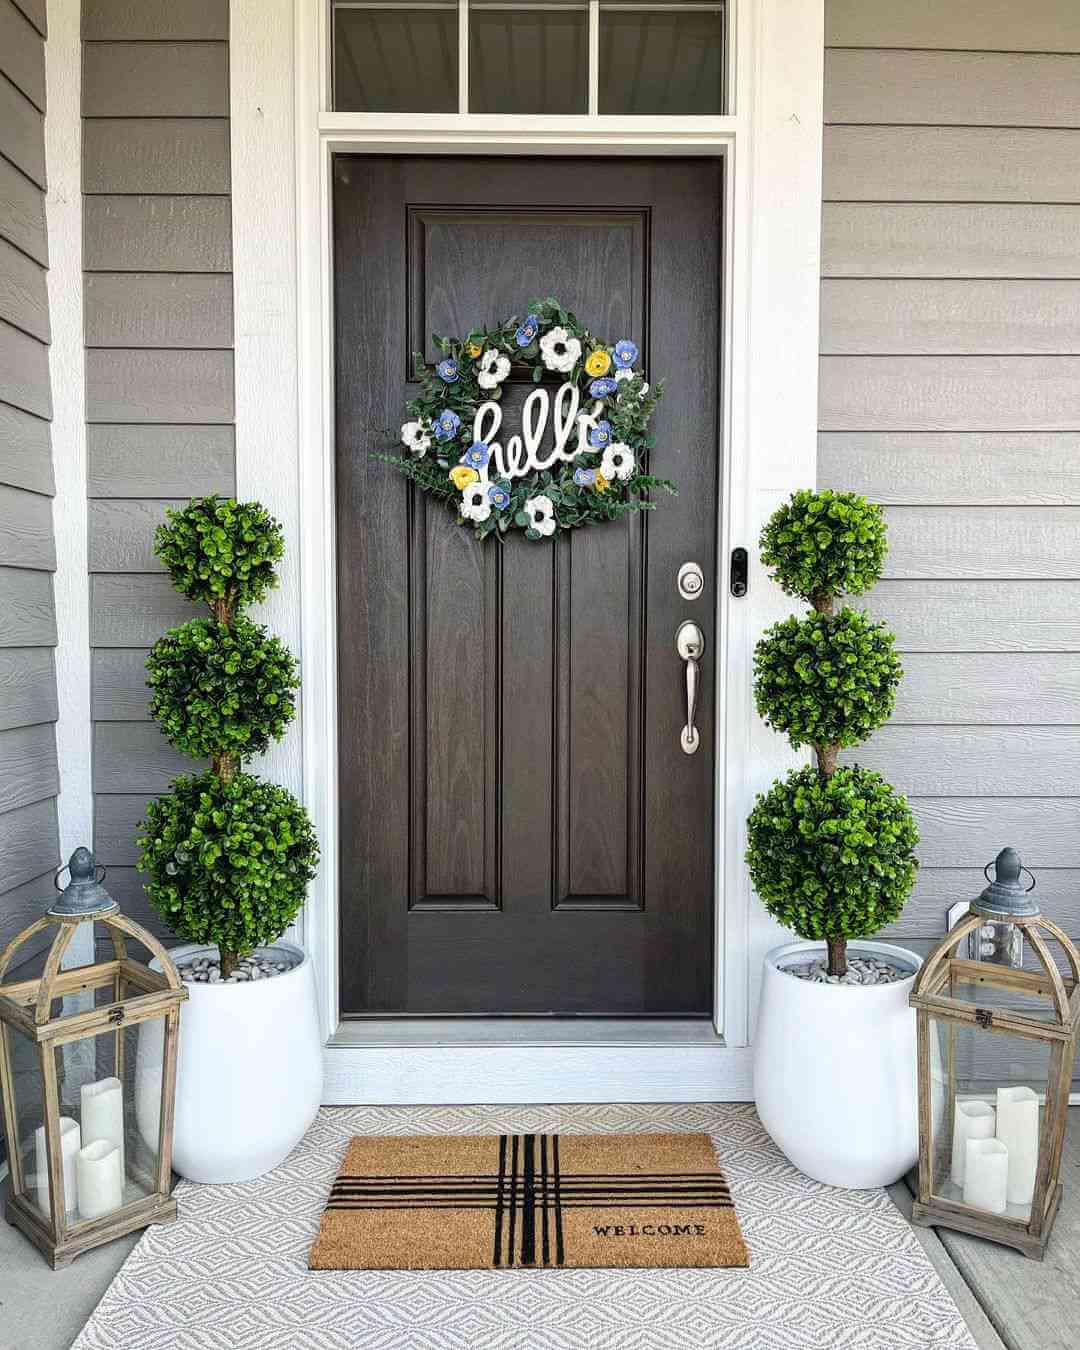 Beautify your front porch with 43 amazing winter decorating ideas - 337